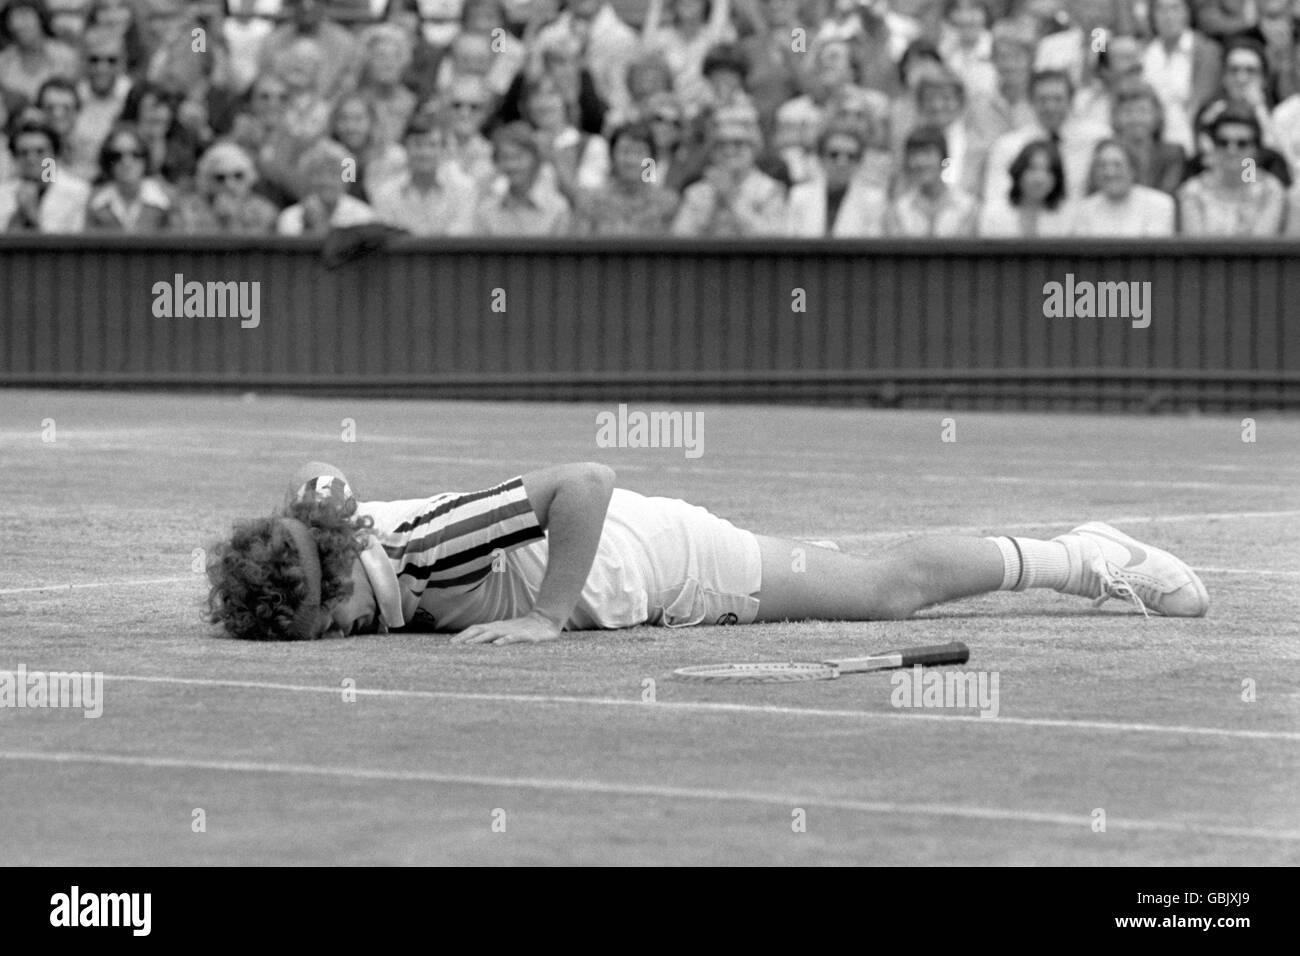 John McEnroe lies flat out on centre court after failing to reach the ball Stock Photo